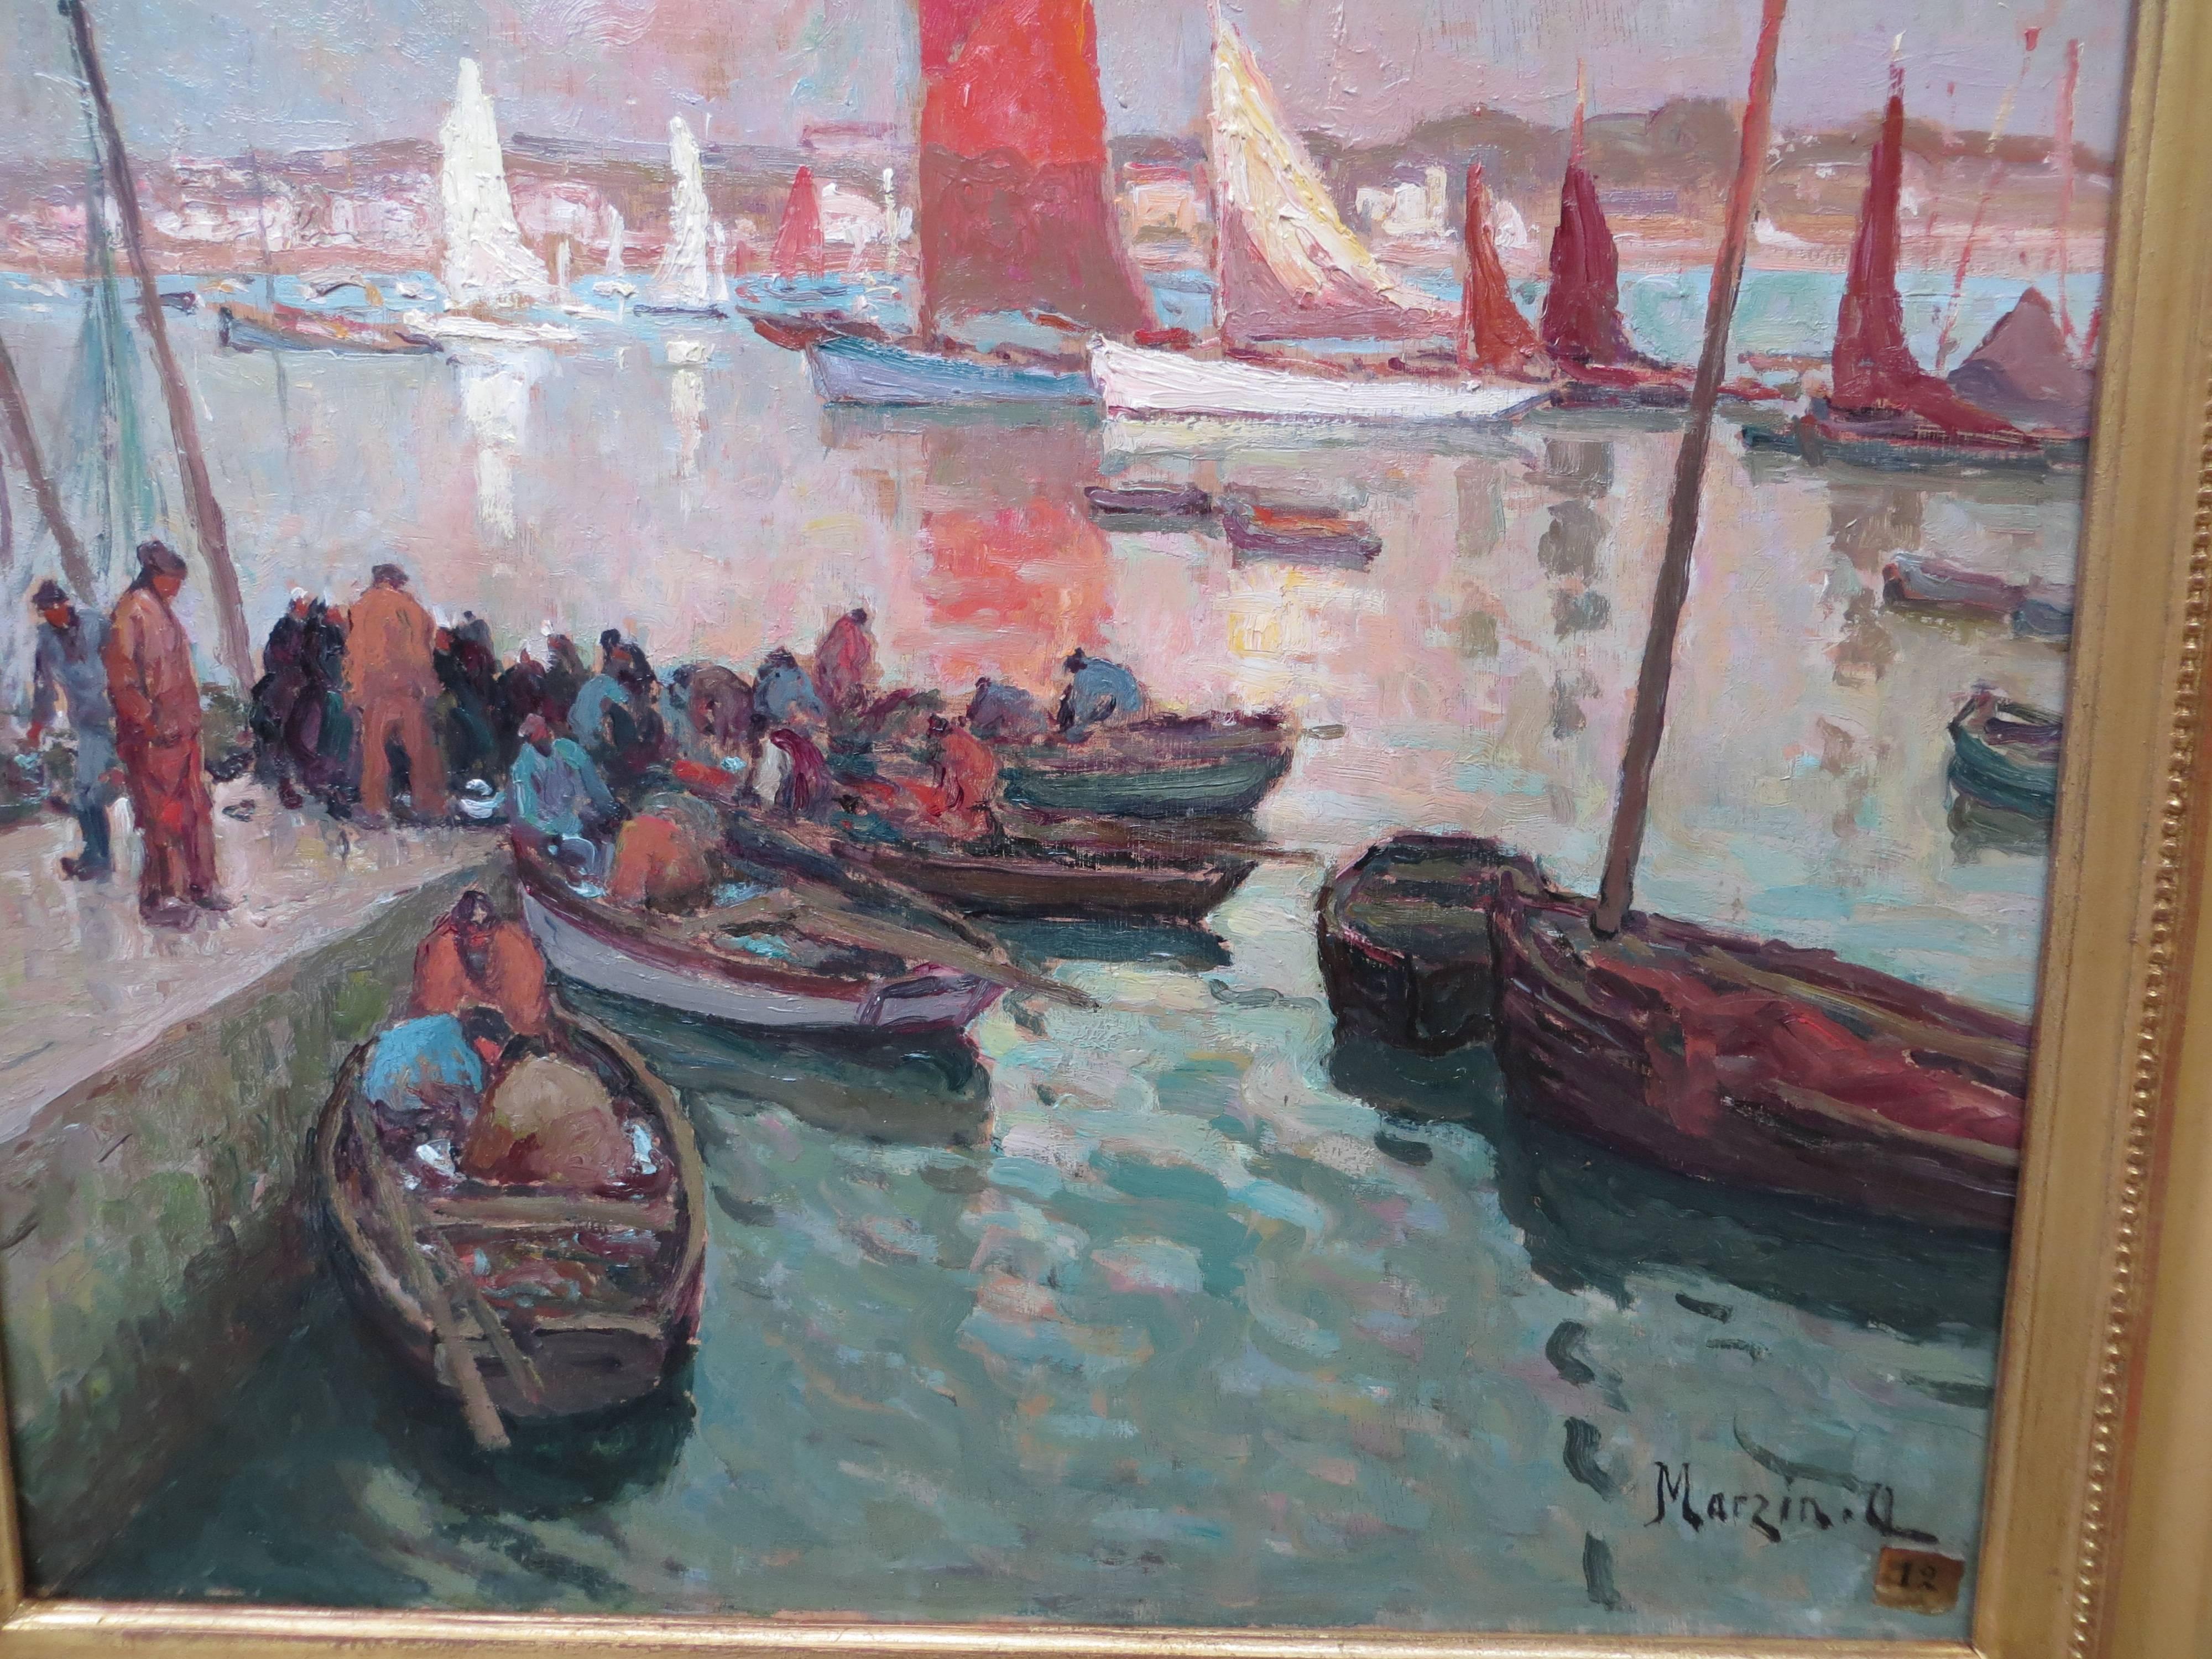 The artistic production of Alfred Marzin (Saint-Yrieix 1880 - Nantes 1943) is exclusively devoted to Brittany: view of ports and small towns, seaside and rocky coasts, scenes of the daily life of peasants and fishermen.

Little master of Breton